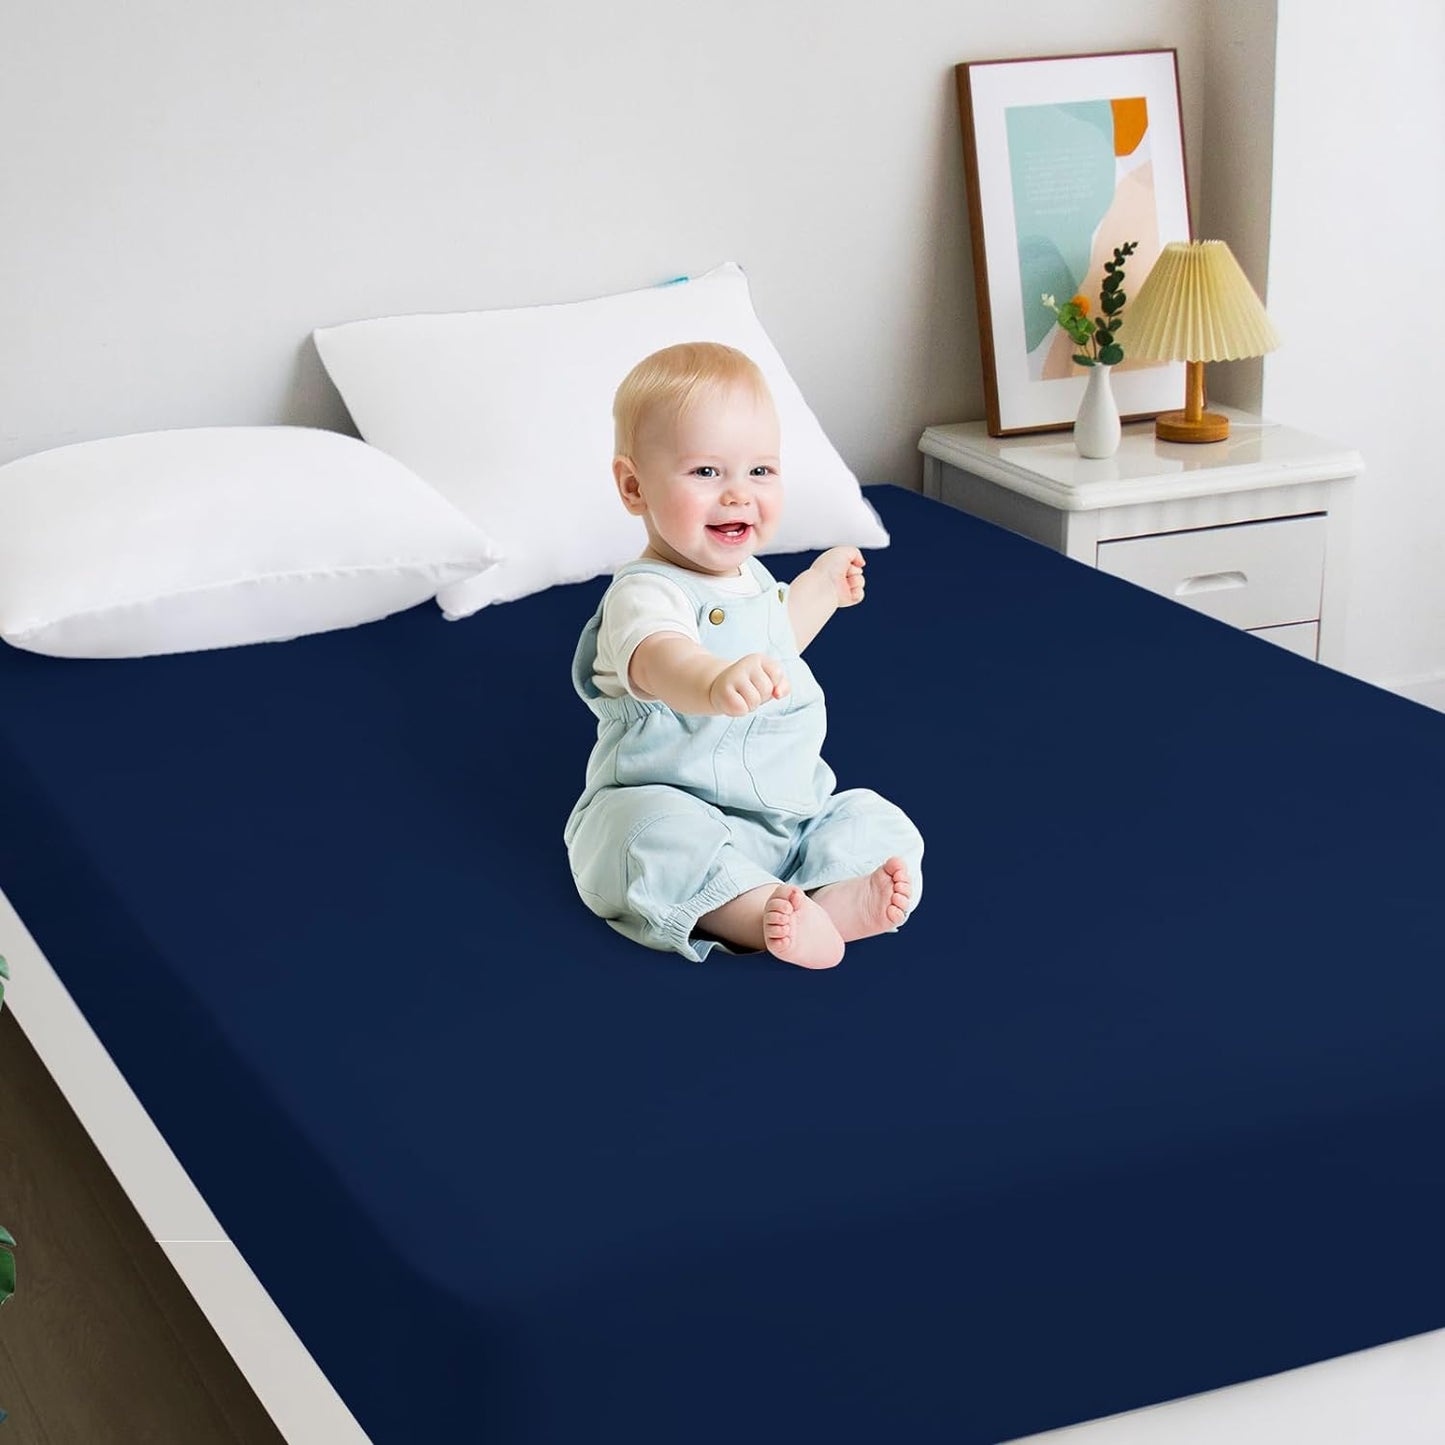 Waterproof Mattress Protector Twin & Full Size, 2 Pack, Noiseless & Soft Mattress Cover with Deep Pocket Up to 14" Depth, Super Breathable & Easy Wash, Navy